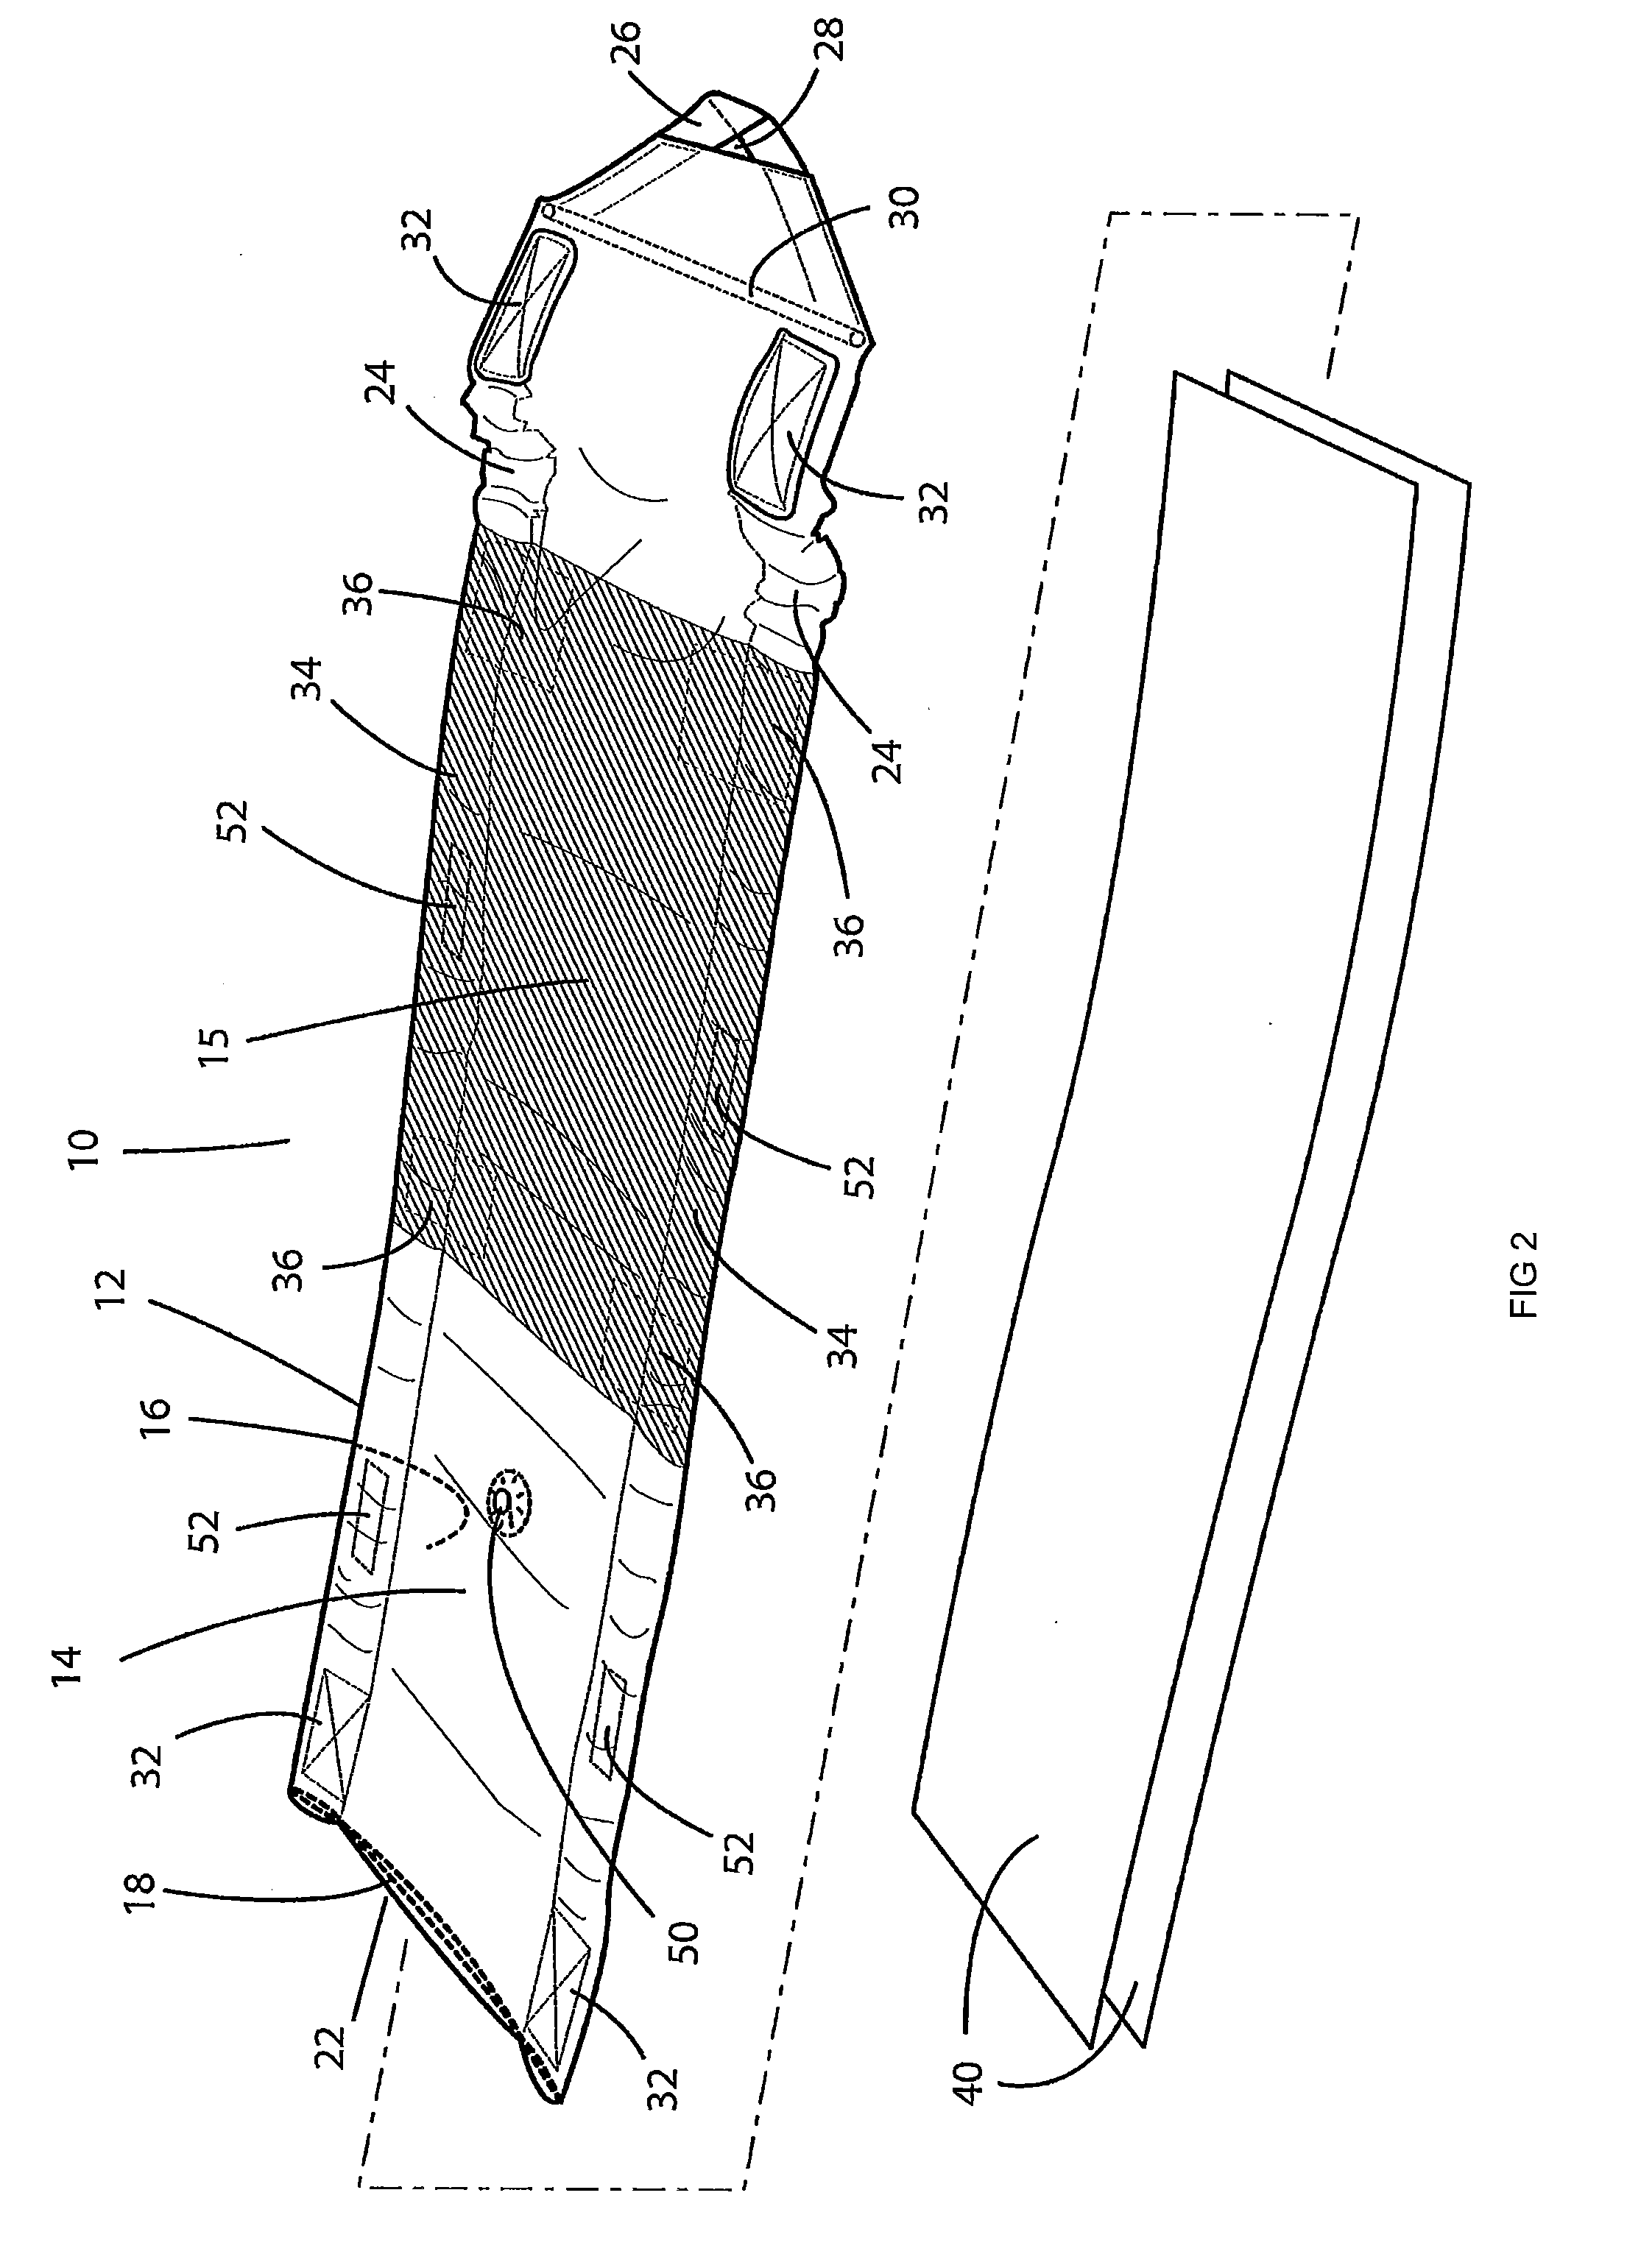 Apparatus and method for testing electronic equipment